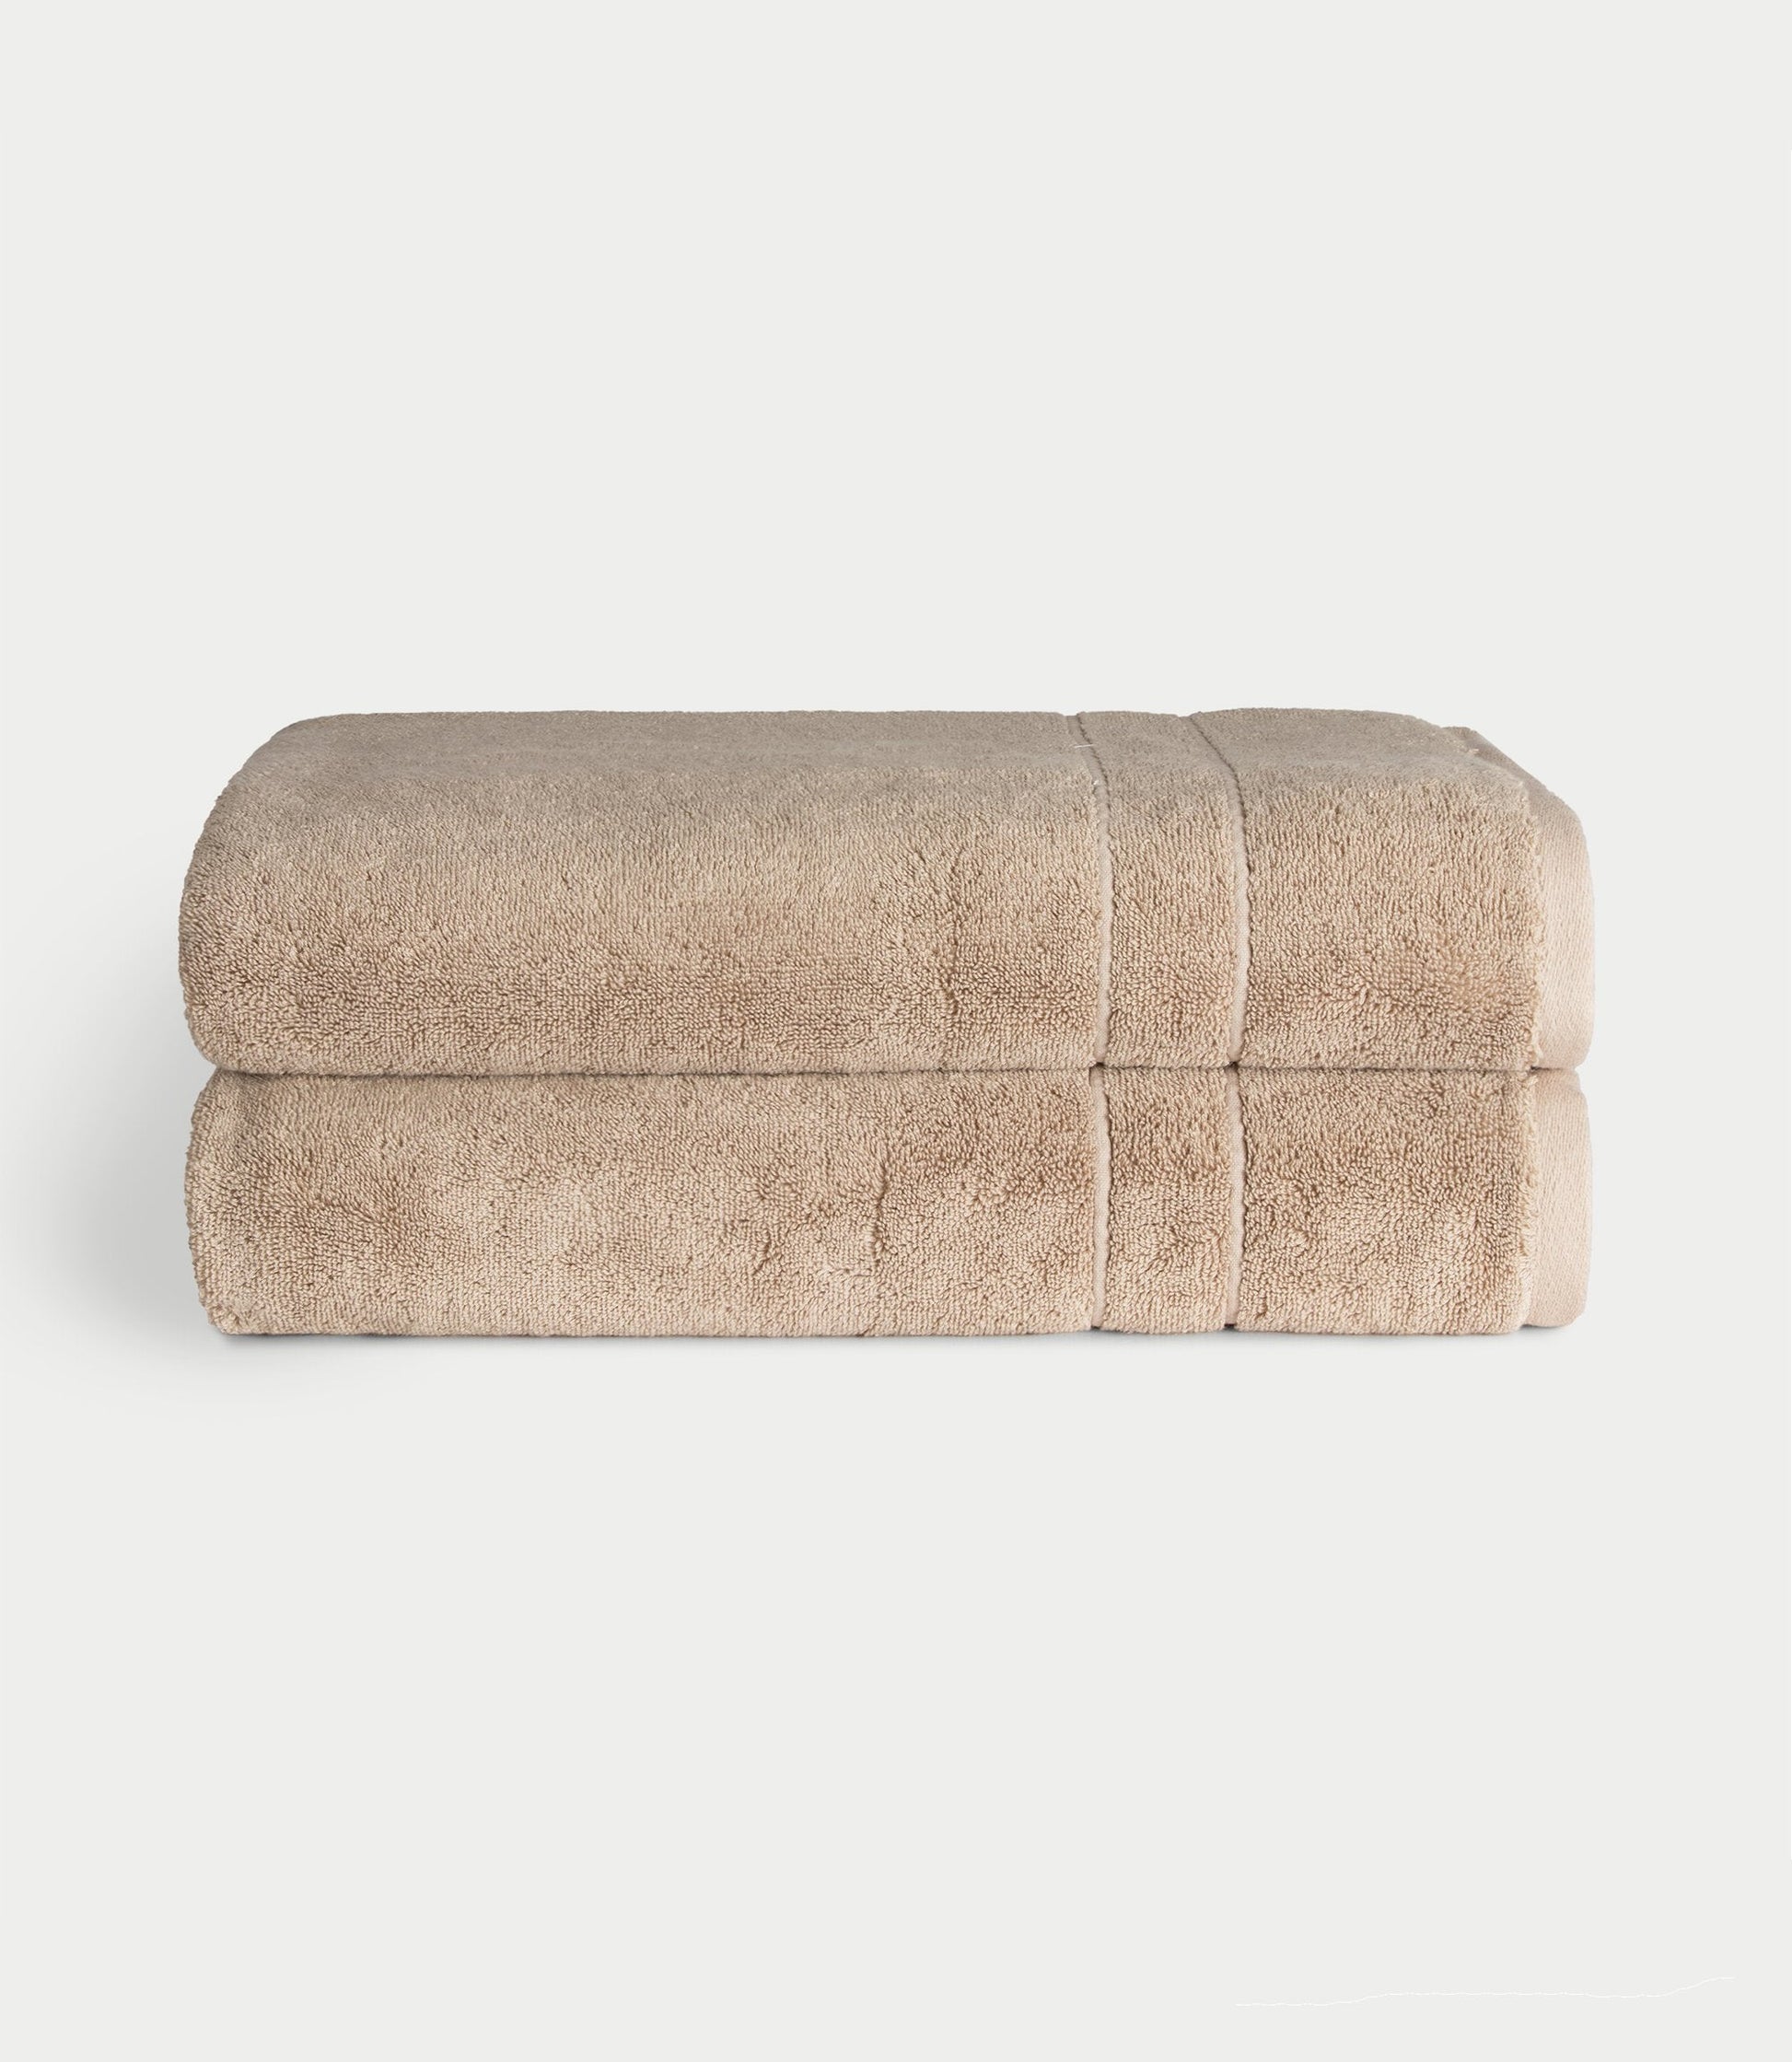 Premium Plush Bath Sheets in the color sand. Photo of bath sheets taken with white background |Color:Sand